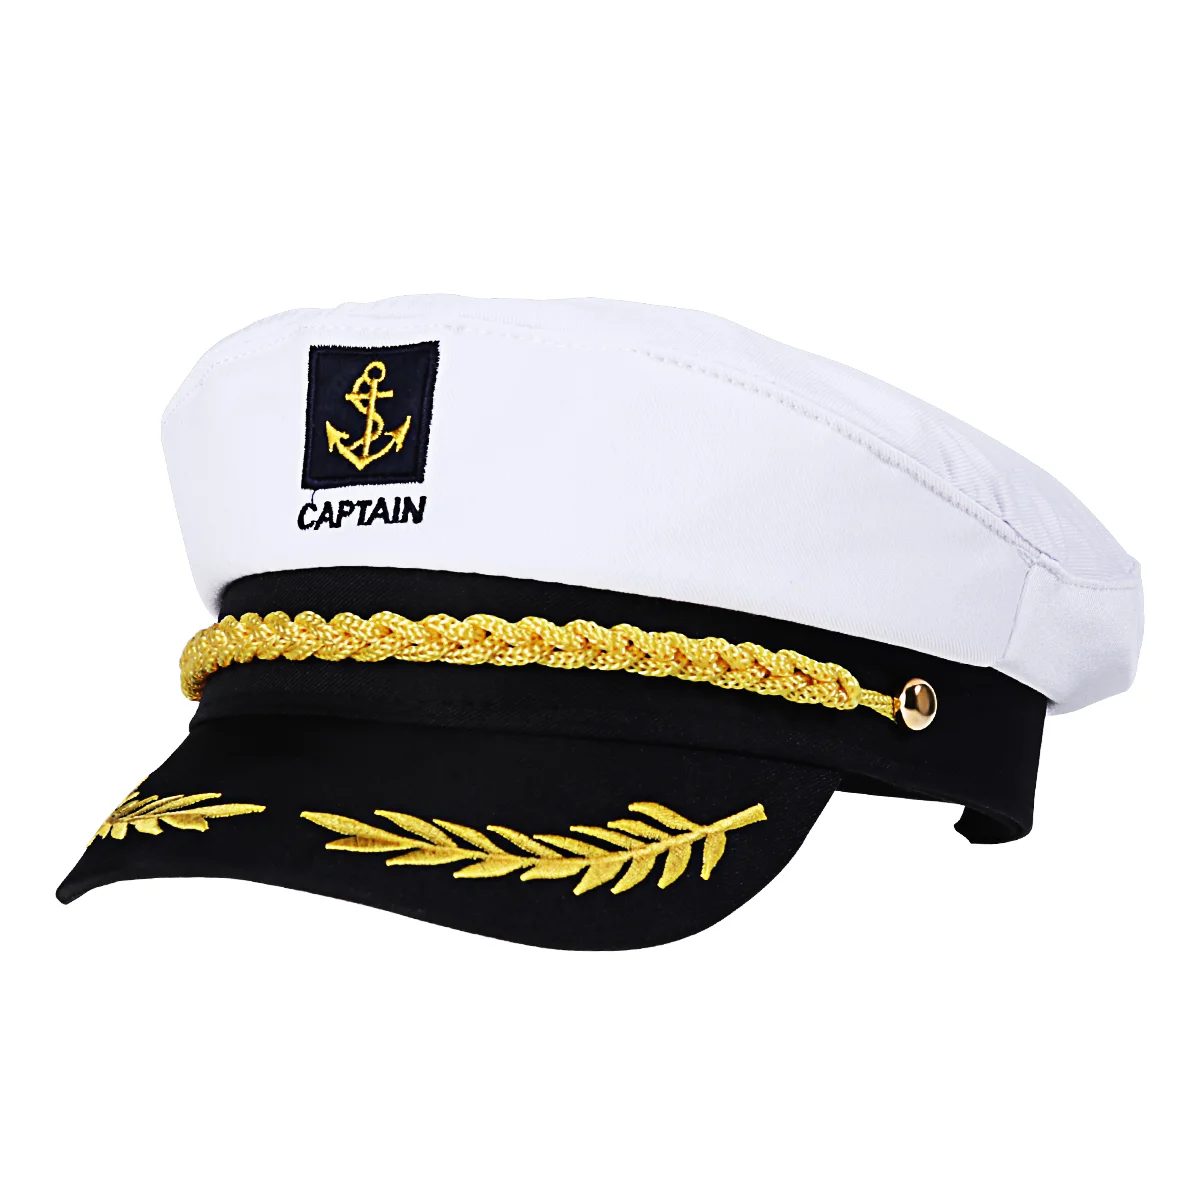 

Hat Captain Sailor Boat Captains Yacht Costume Adult Navy Hats Men Cap Ship Marine Party Admiral White Nautical Women Boating